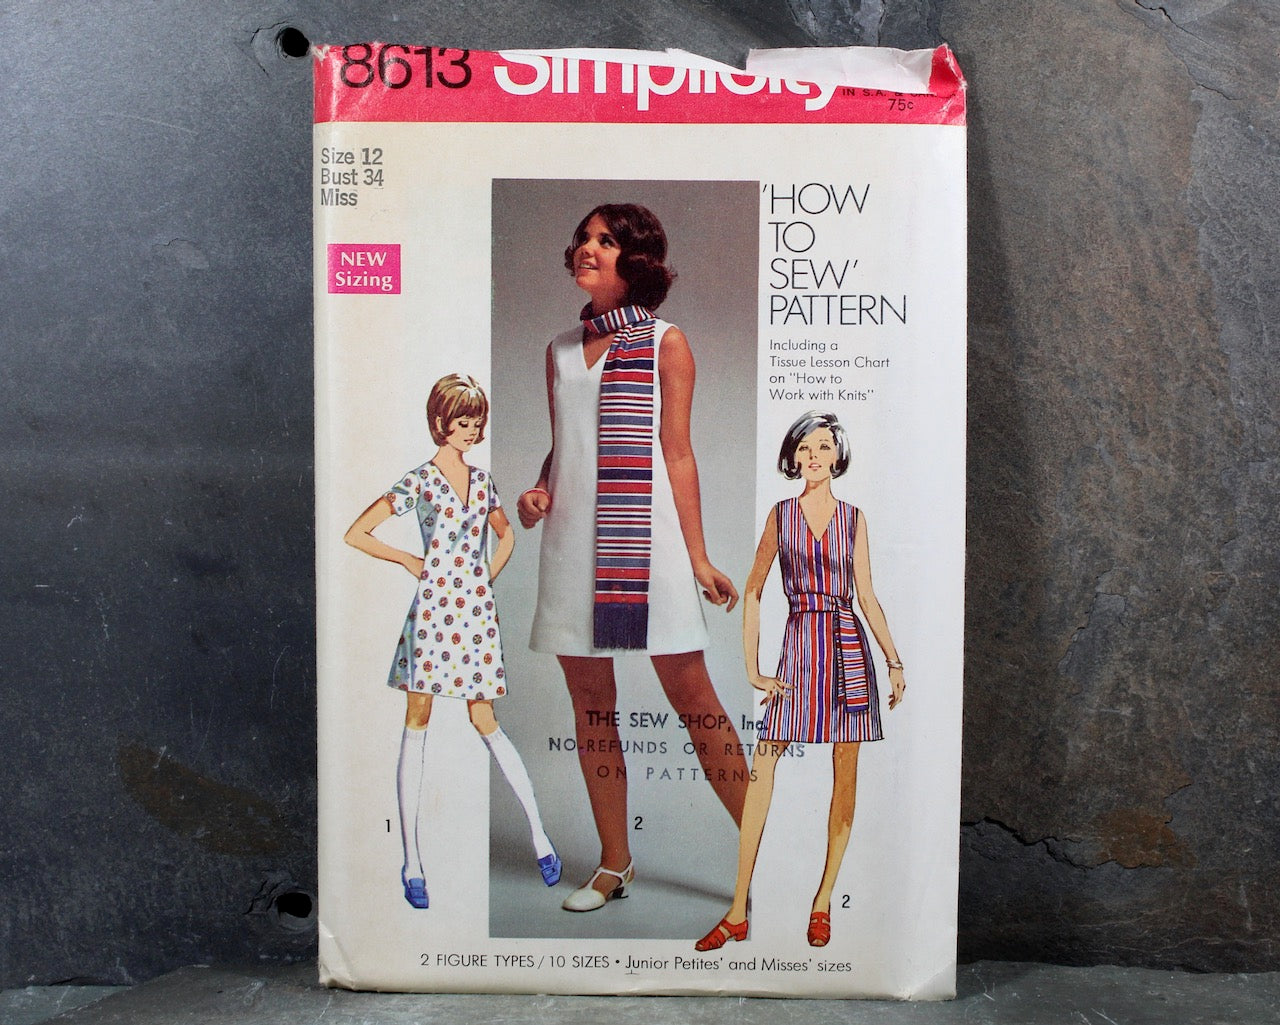 1969 Simplicity #8613 "How to Sew" Dress Pattern | | COMPLETE Cut Pattern in Original Envelope